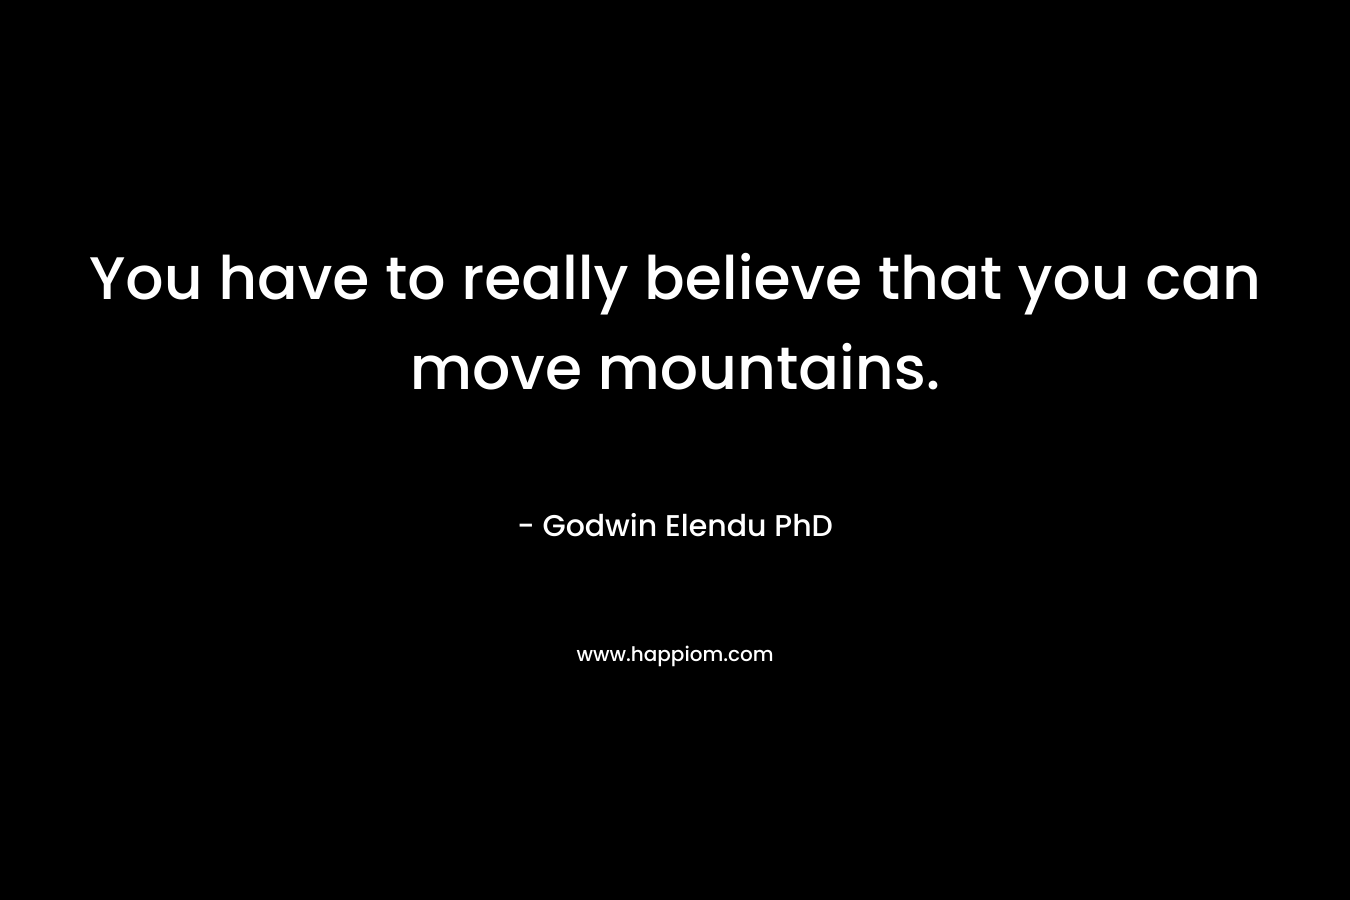 You have to really believe that you can move mountains.